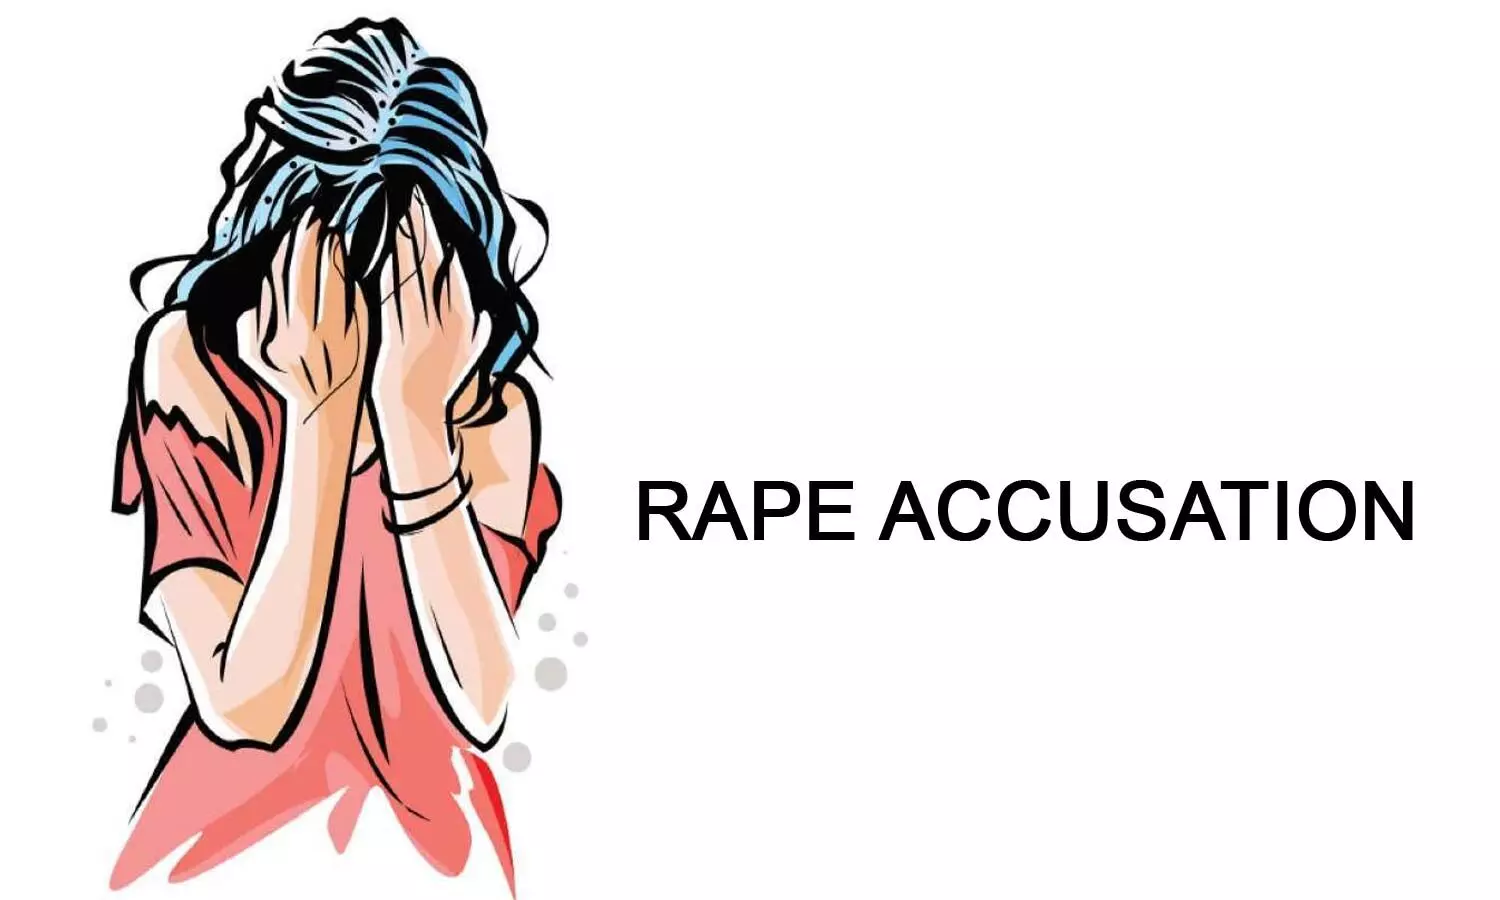 RIMS SR Booked for alleged rape attempt on 1st year Anaesthesia Medico, now absconding